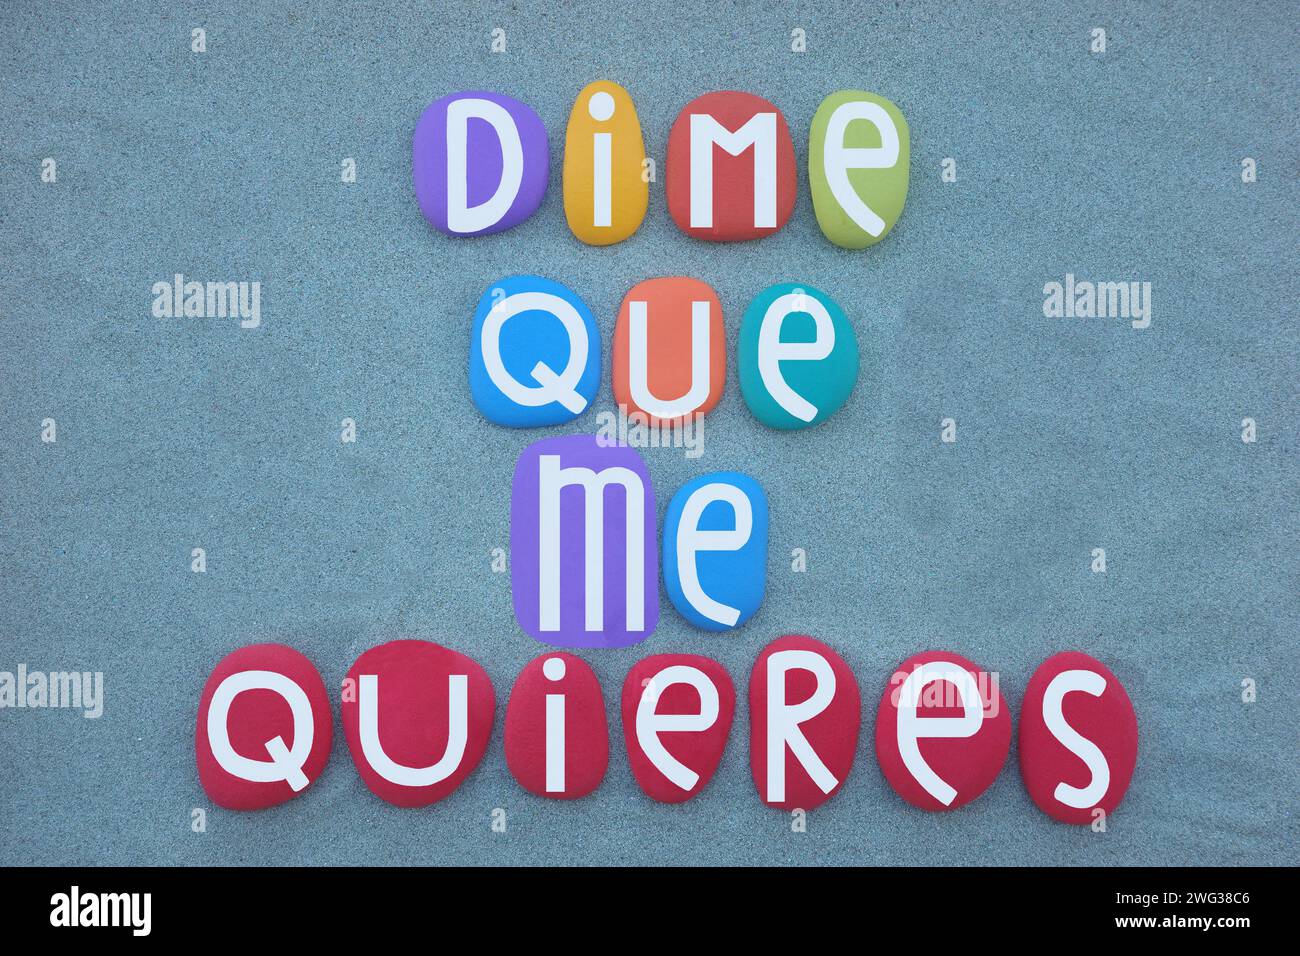 Dime que me quieres, tell me you love me, spanish text composed with hand painted multi colored stone letters over green sand Stock Photo